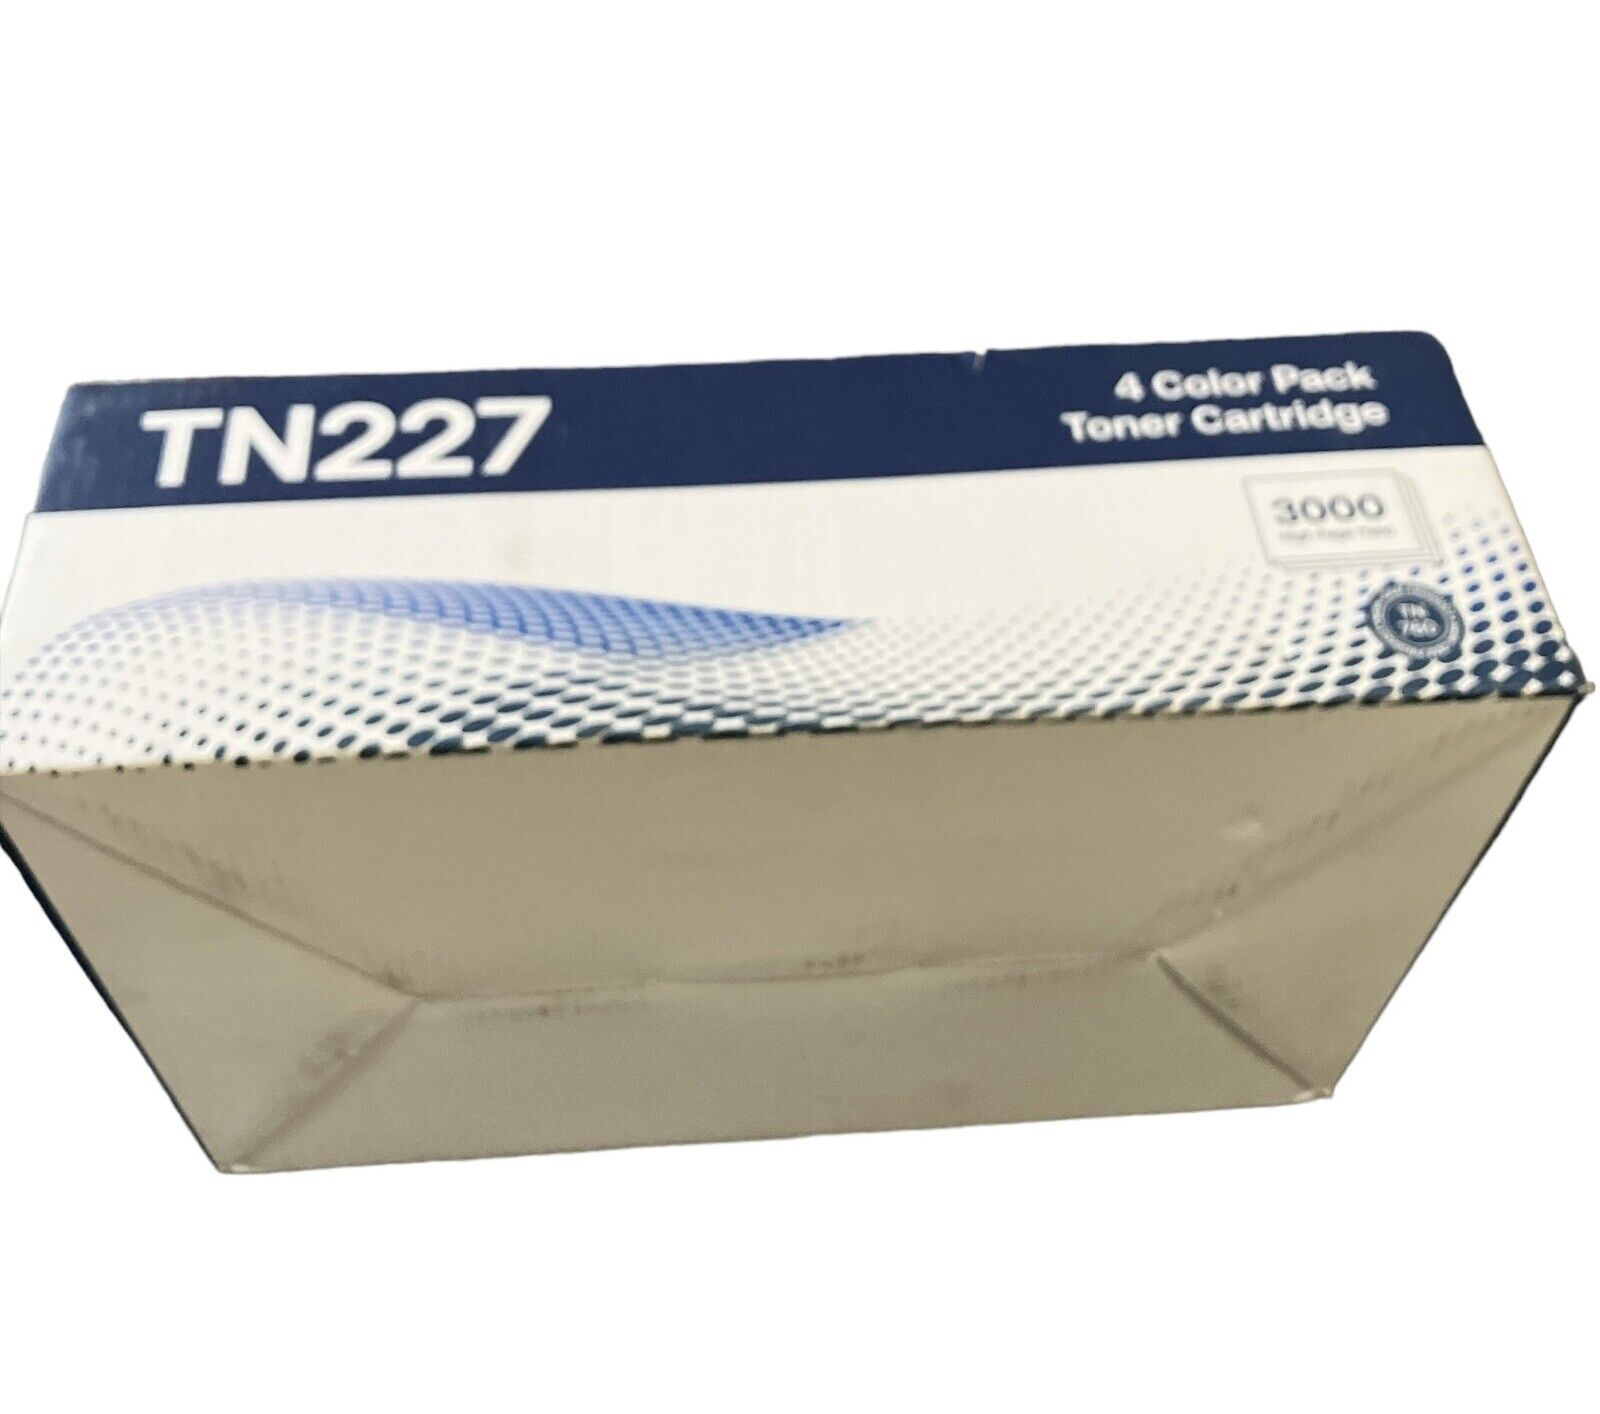 Unbranded TN227 3000 High Yield Toner Cartridge - 4 Color Pack.